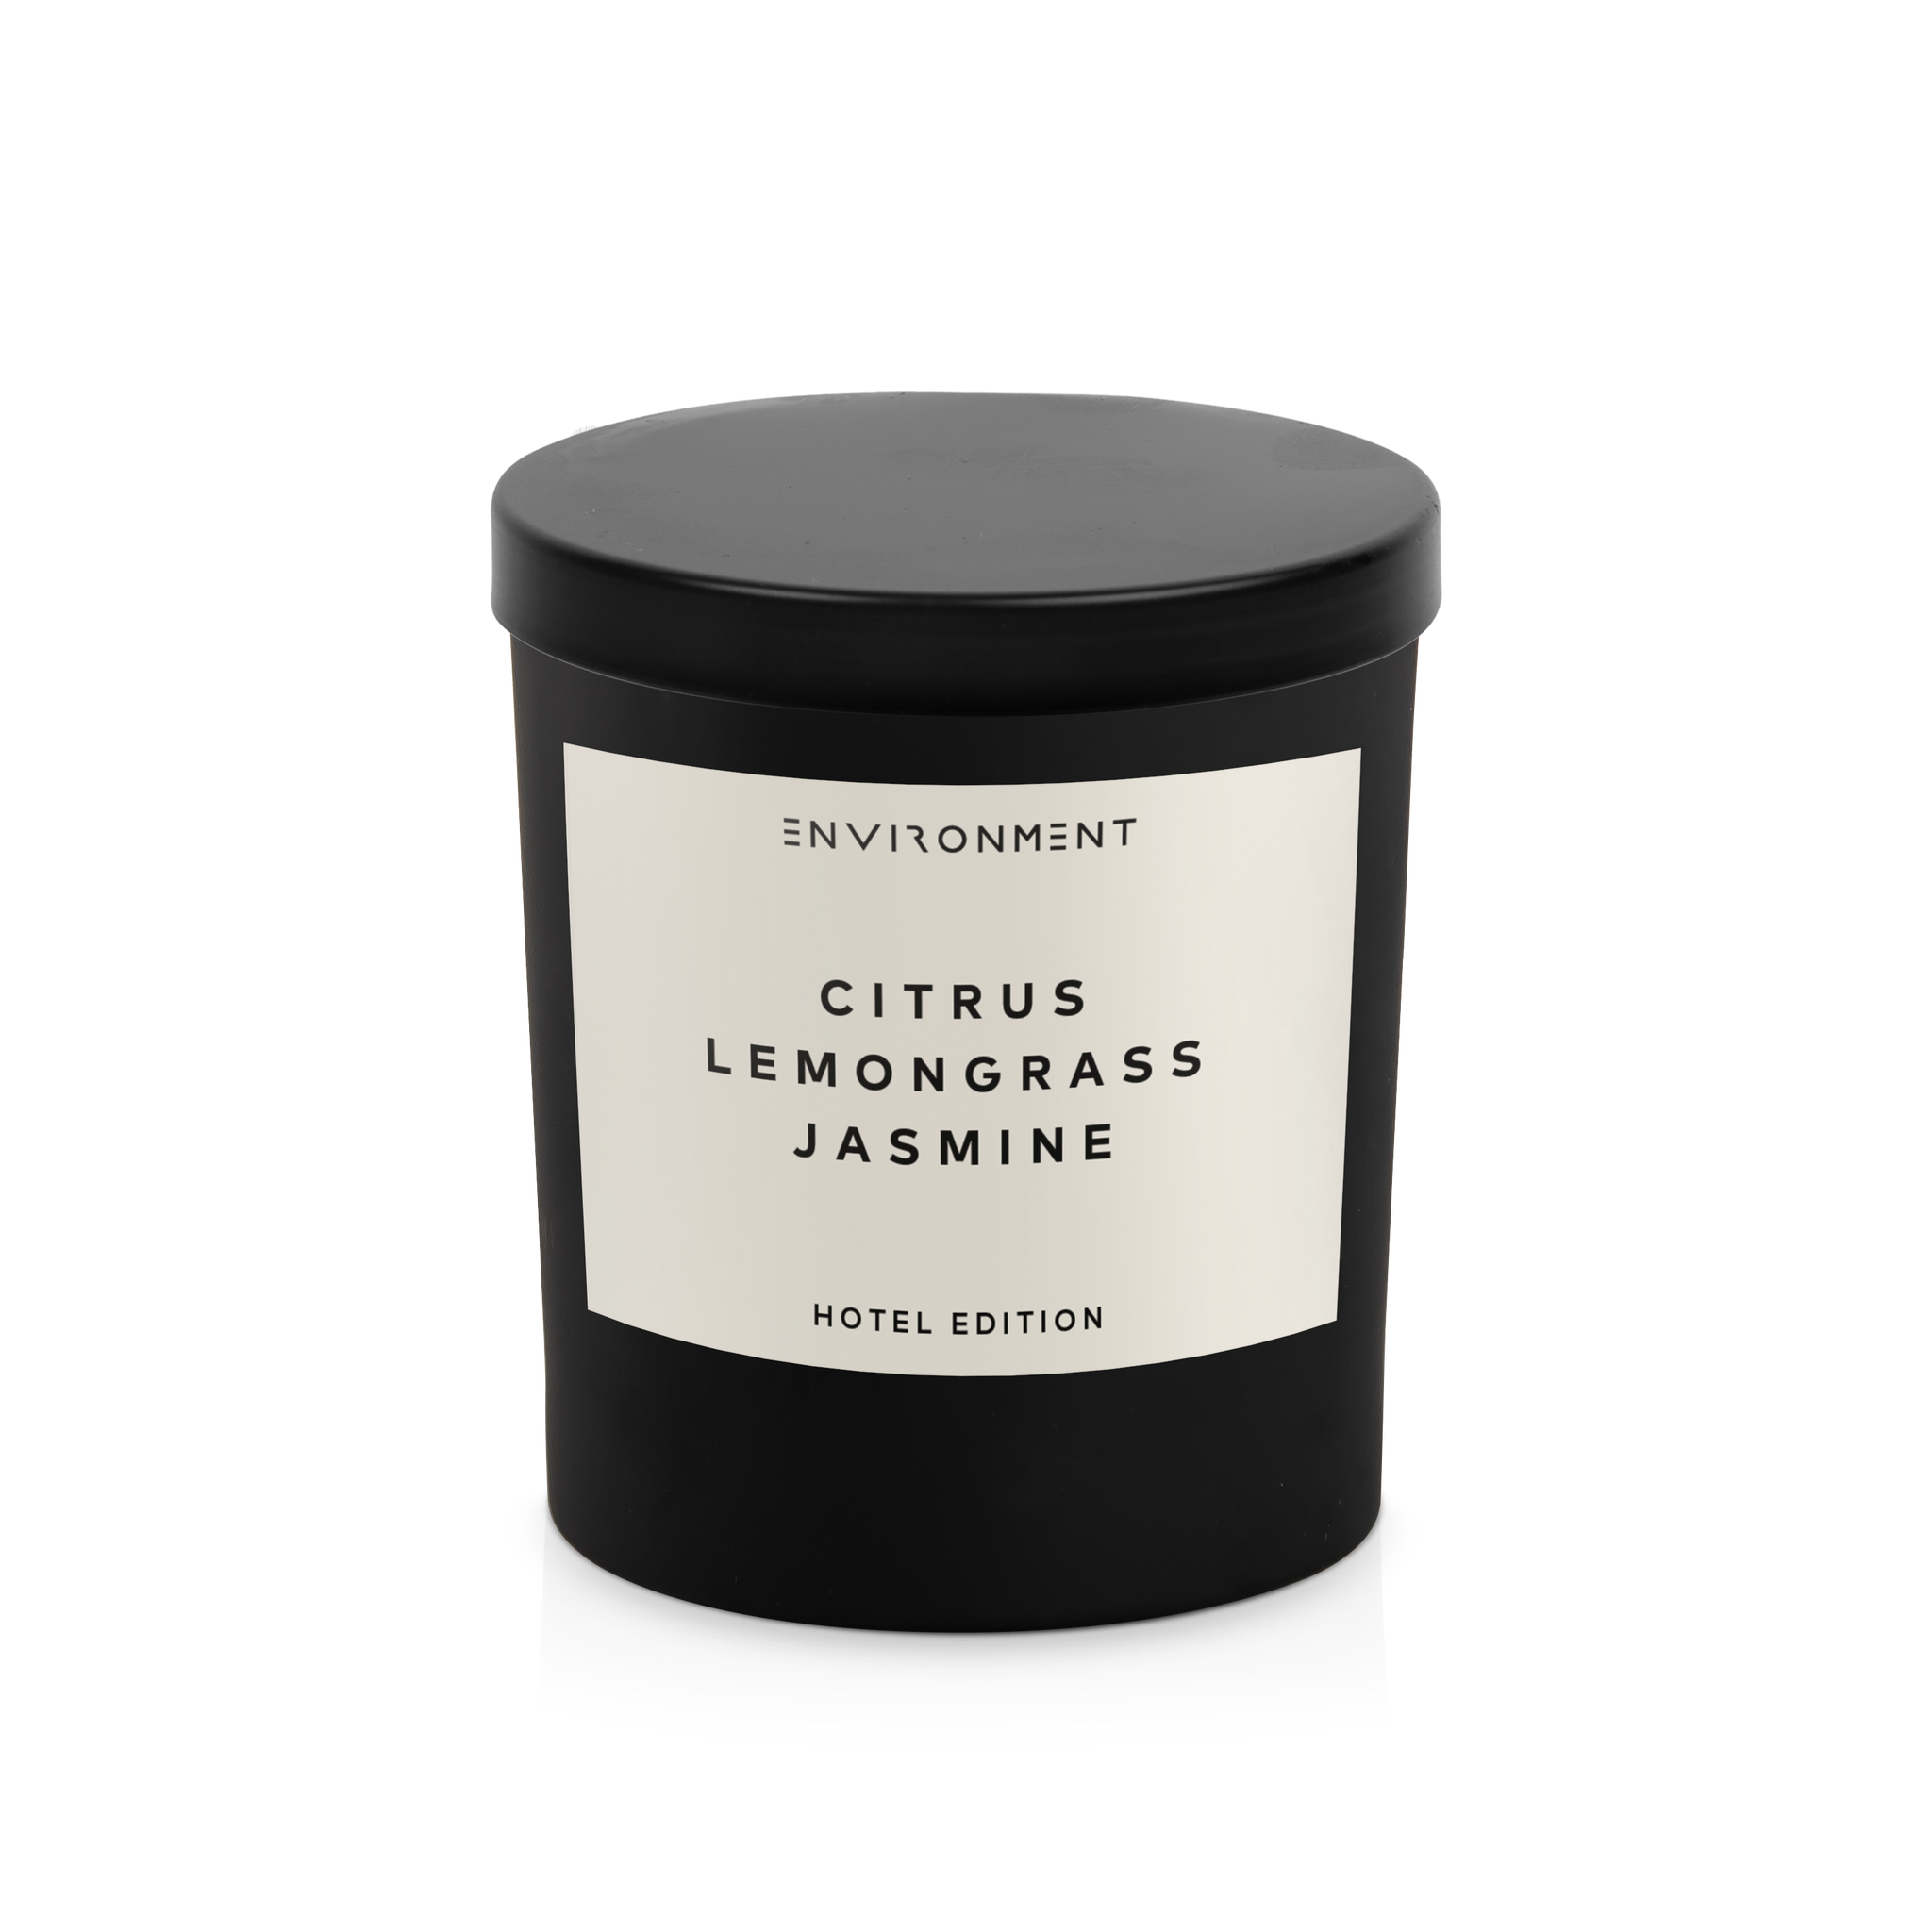 8oz Citrus | Lemongrass | Jasmine Candle with Lid and Box (Inspired by W Hotel®)